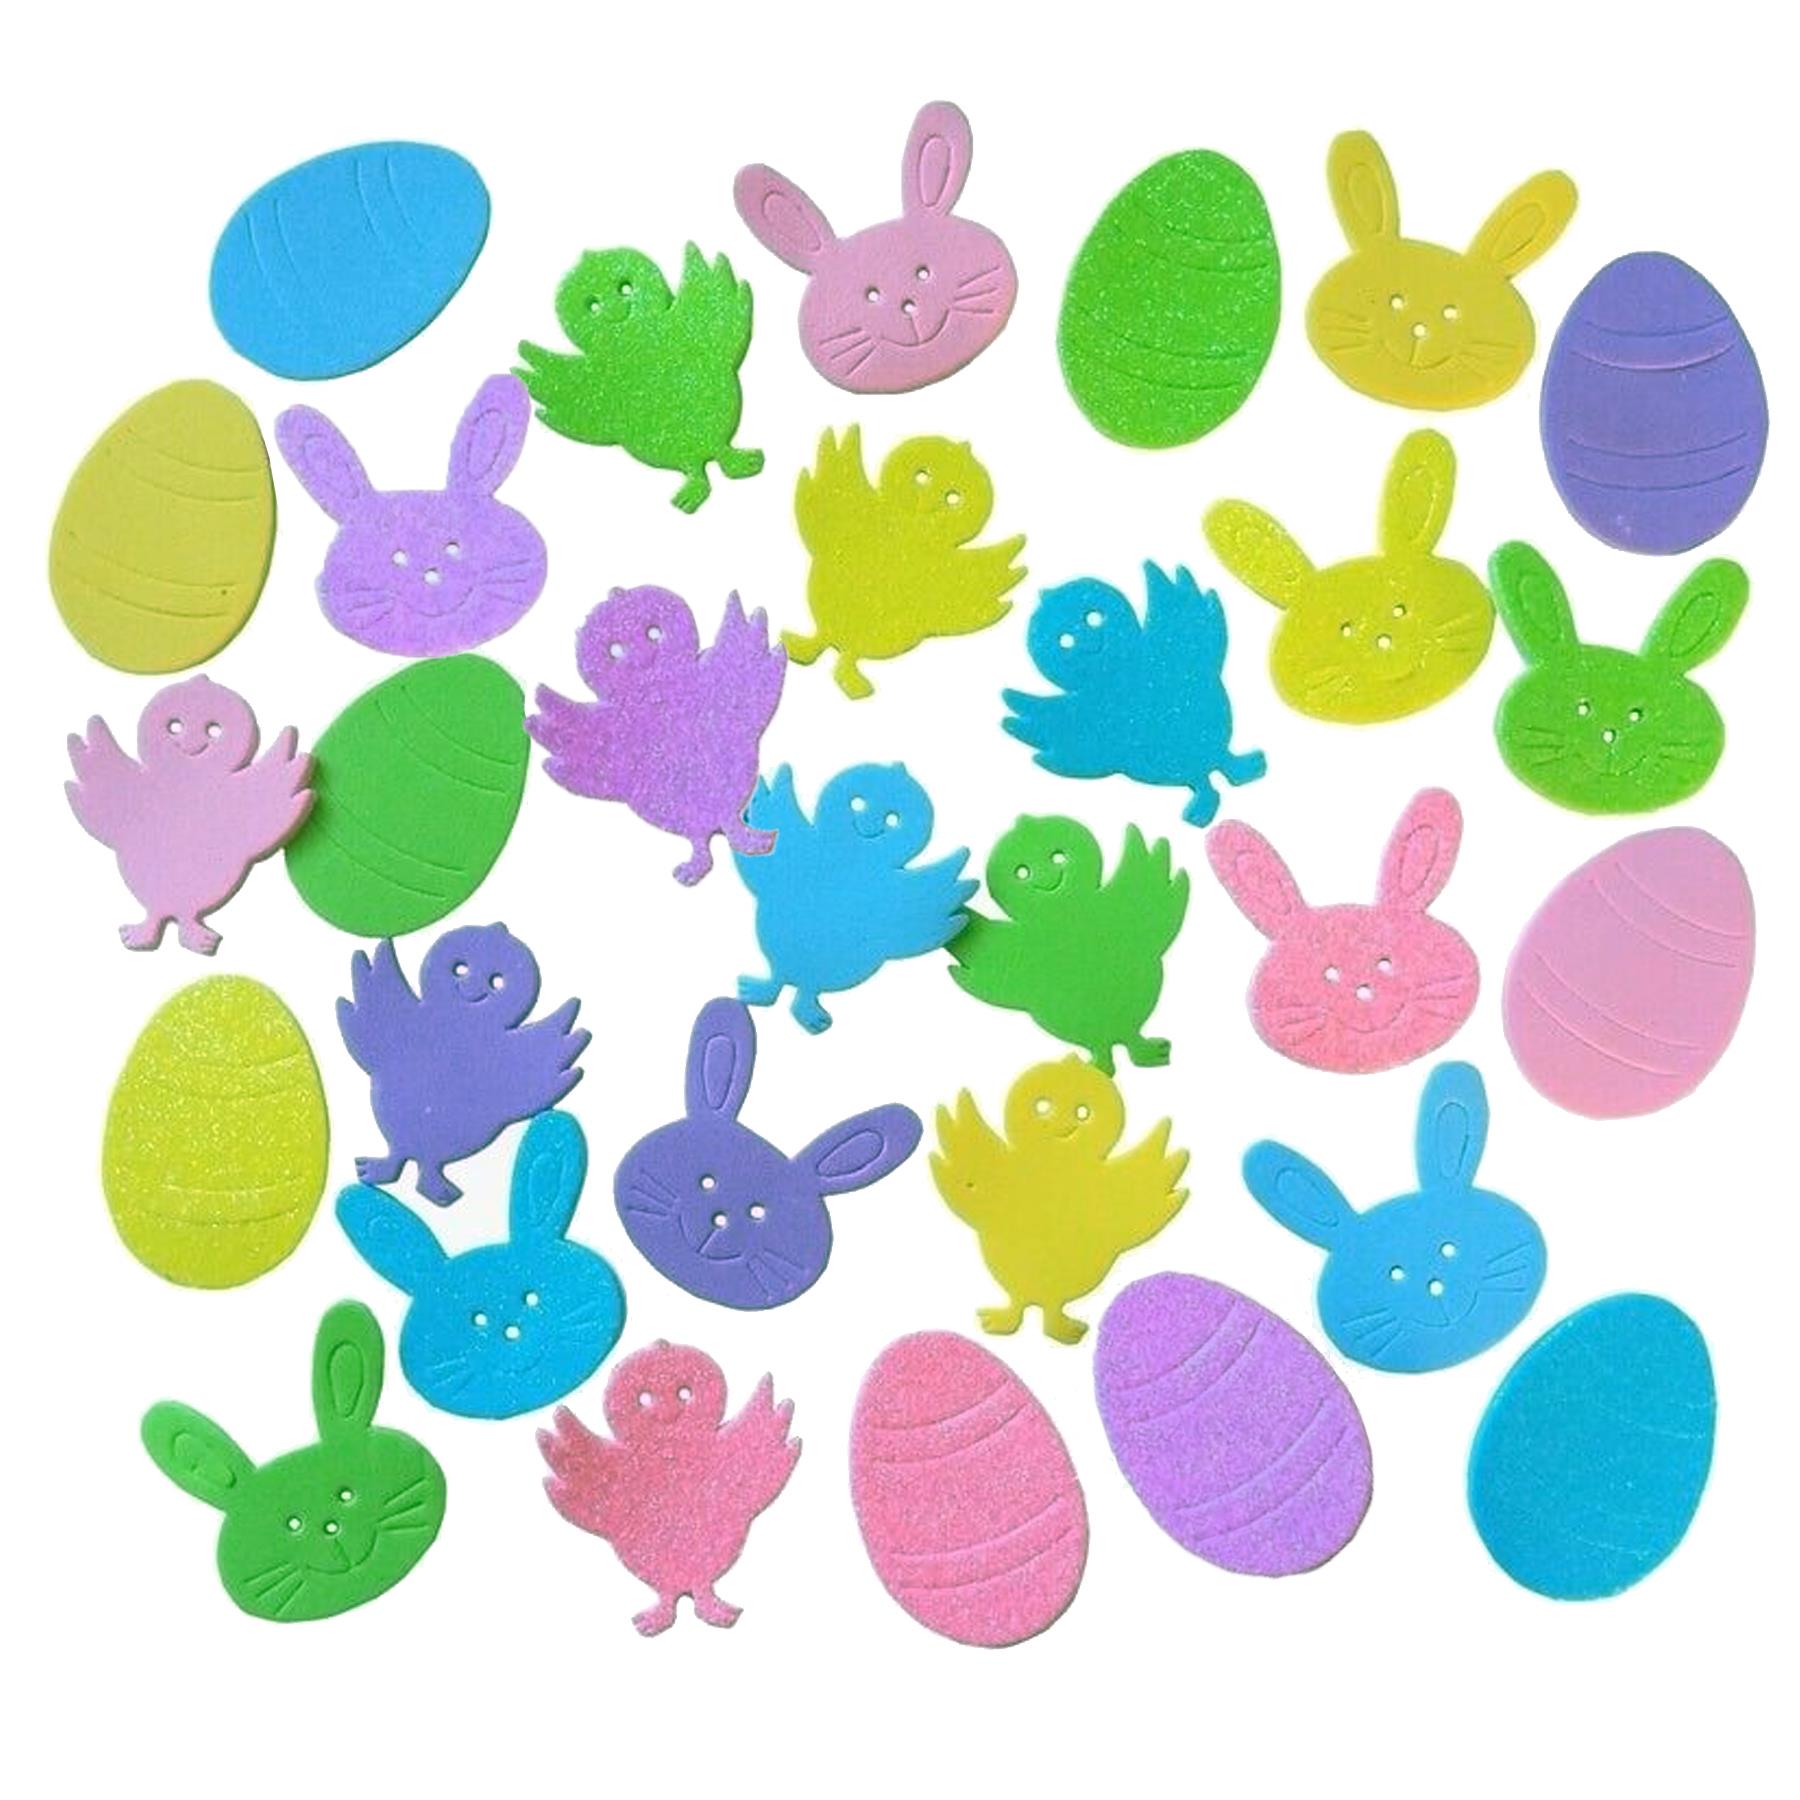 Easter Decorations, Bonnet Making, Arts and Crafts - Glitter Plain Foam Stickers